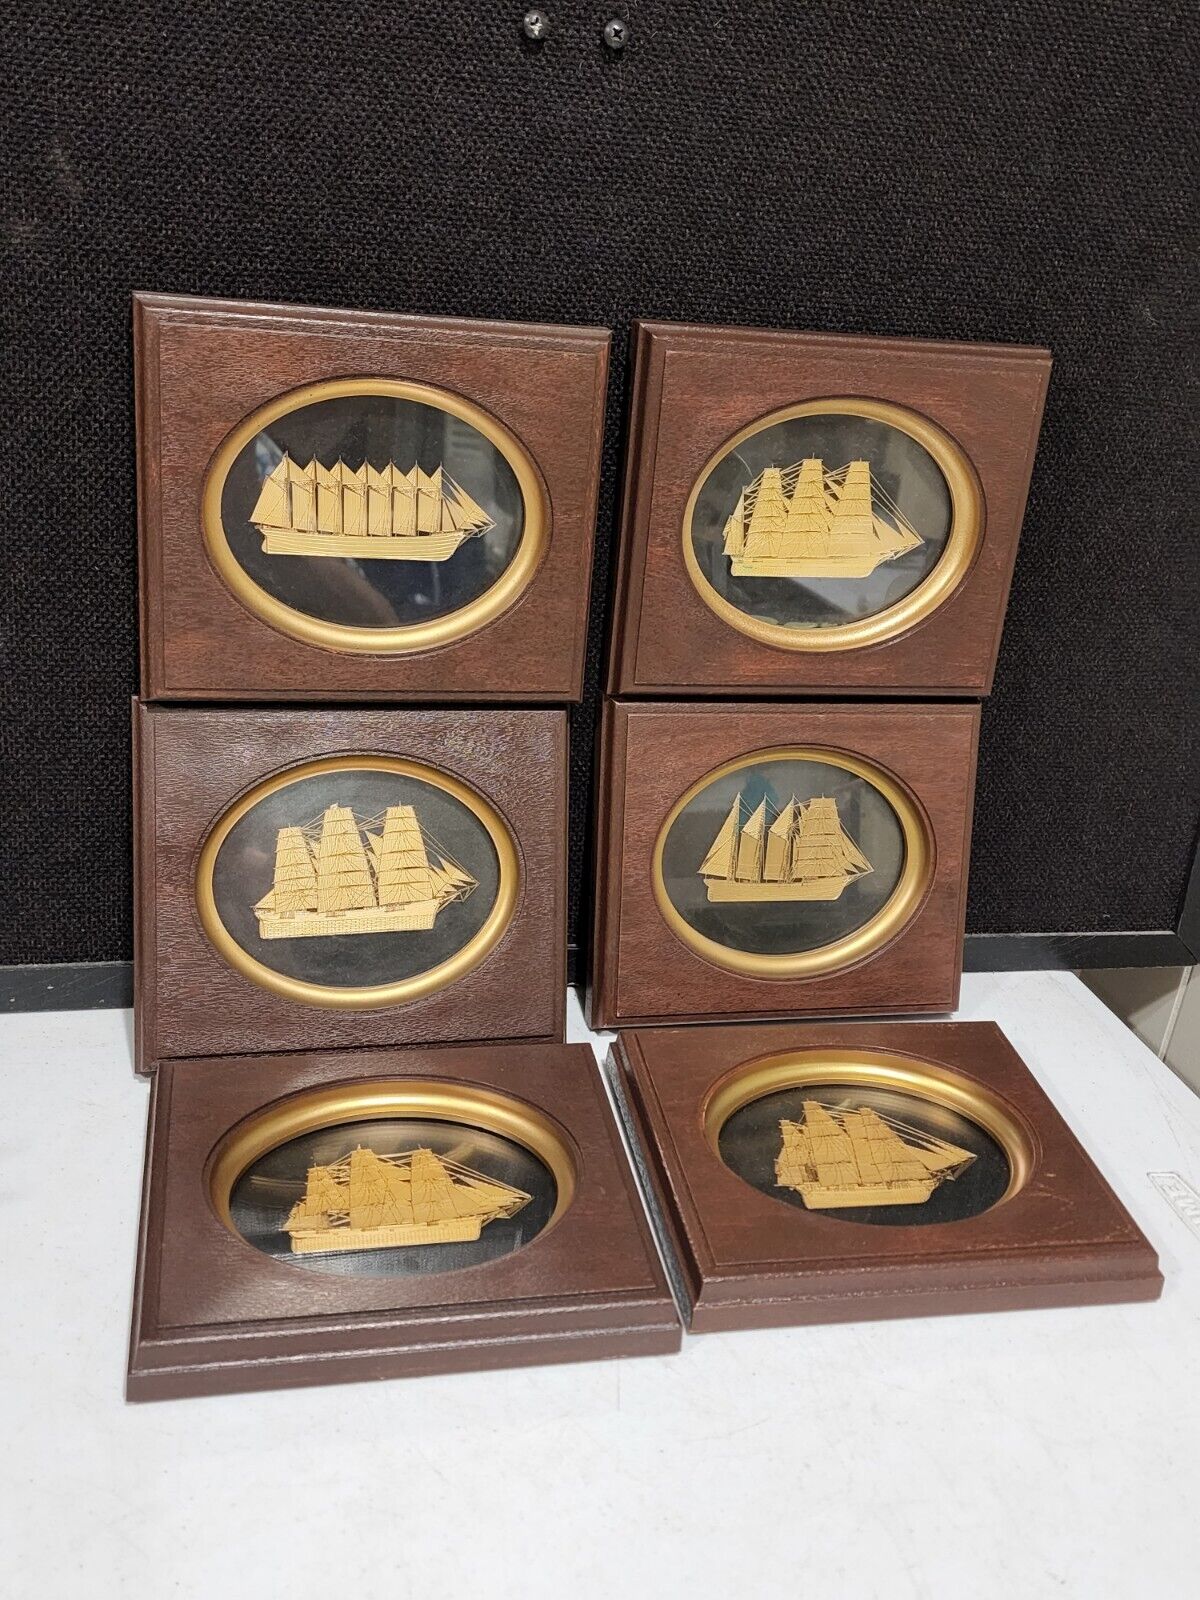 SET OF 6-Franklin Mint The Golden Age of American Sail Boat Ship Framed Nautical